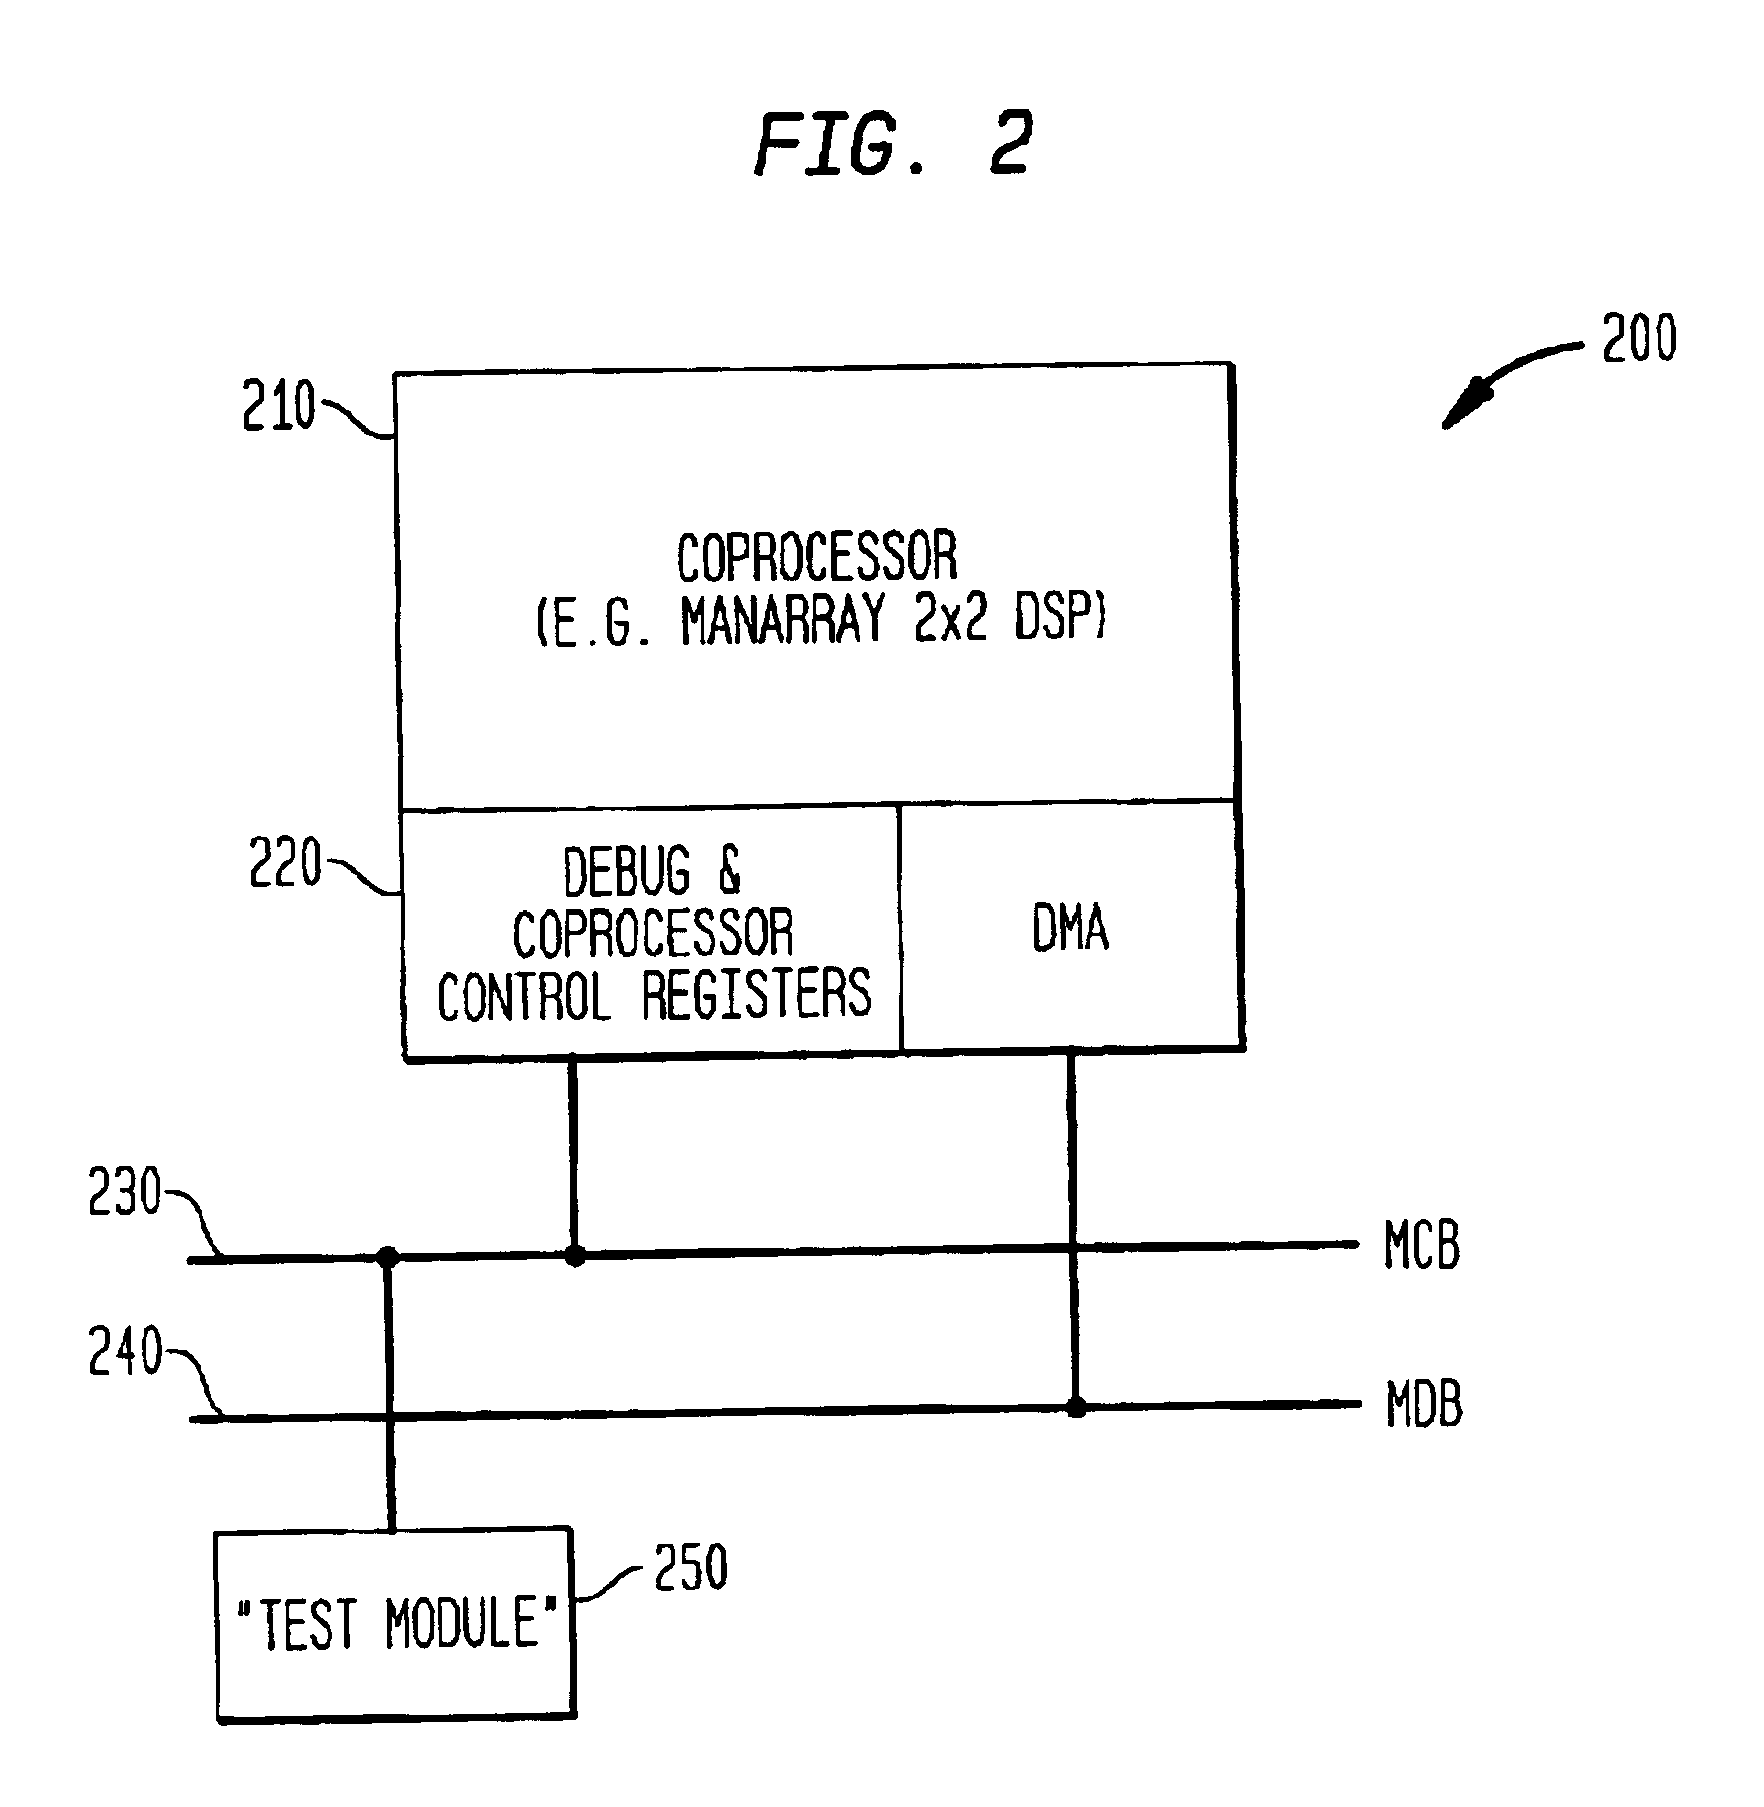 Control processor dynamically loading shadow instruction register associated with memory entry of coprocessor in flexible coupling mode